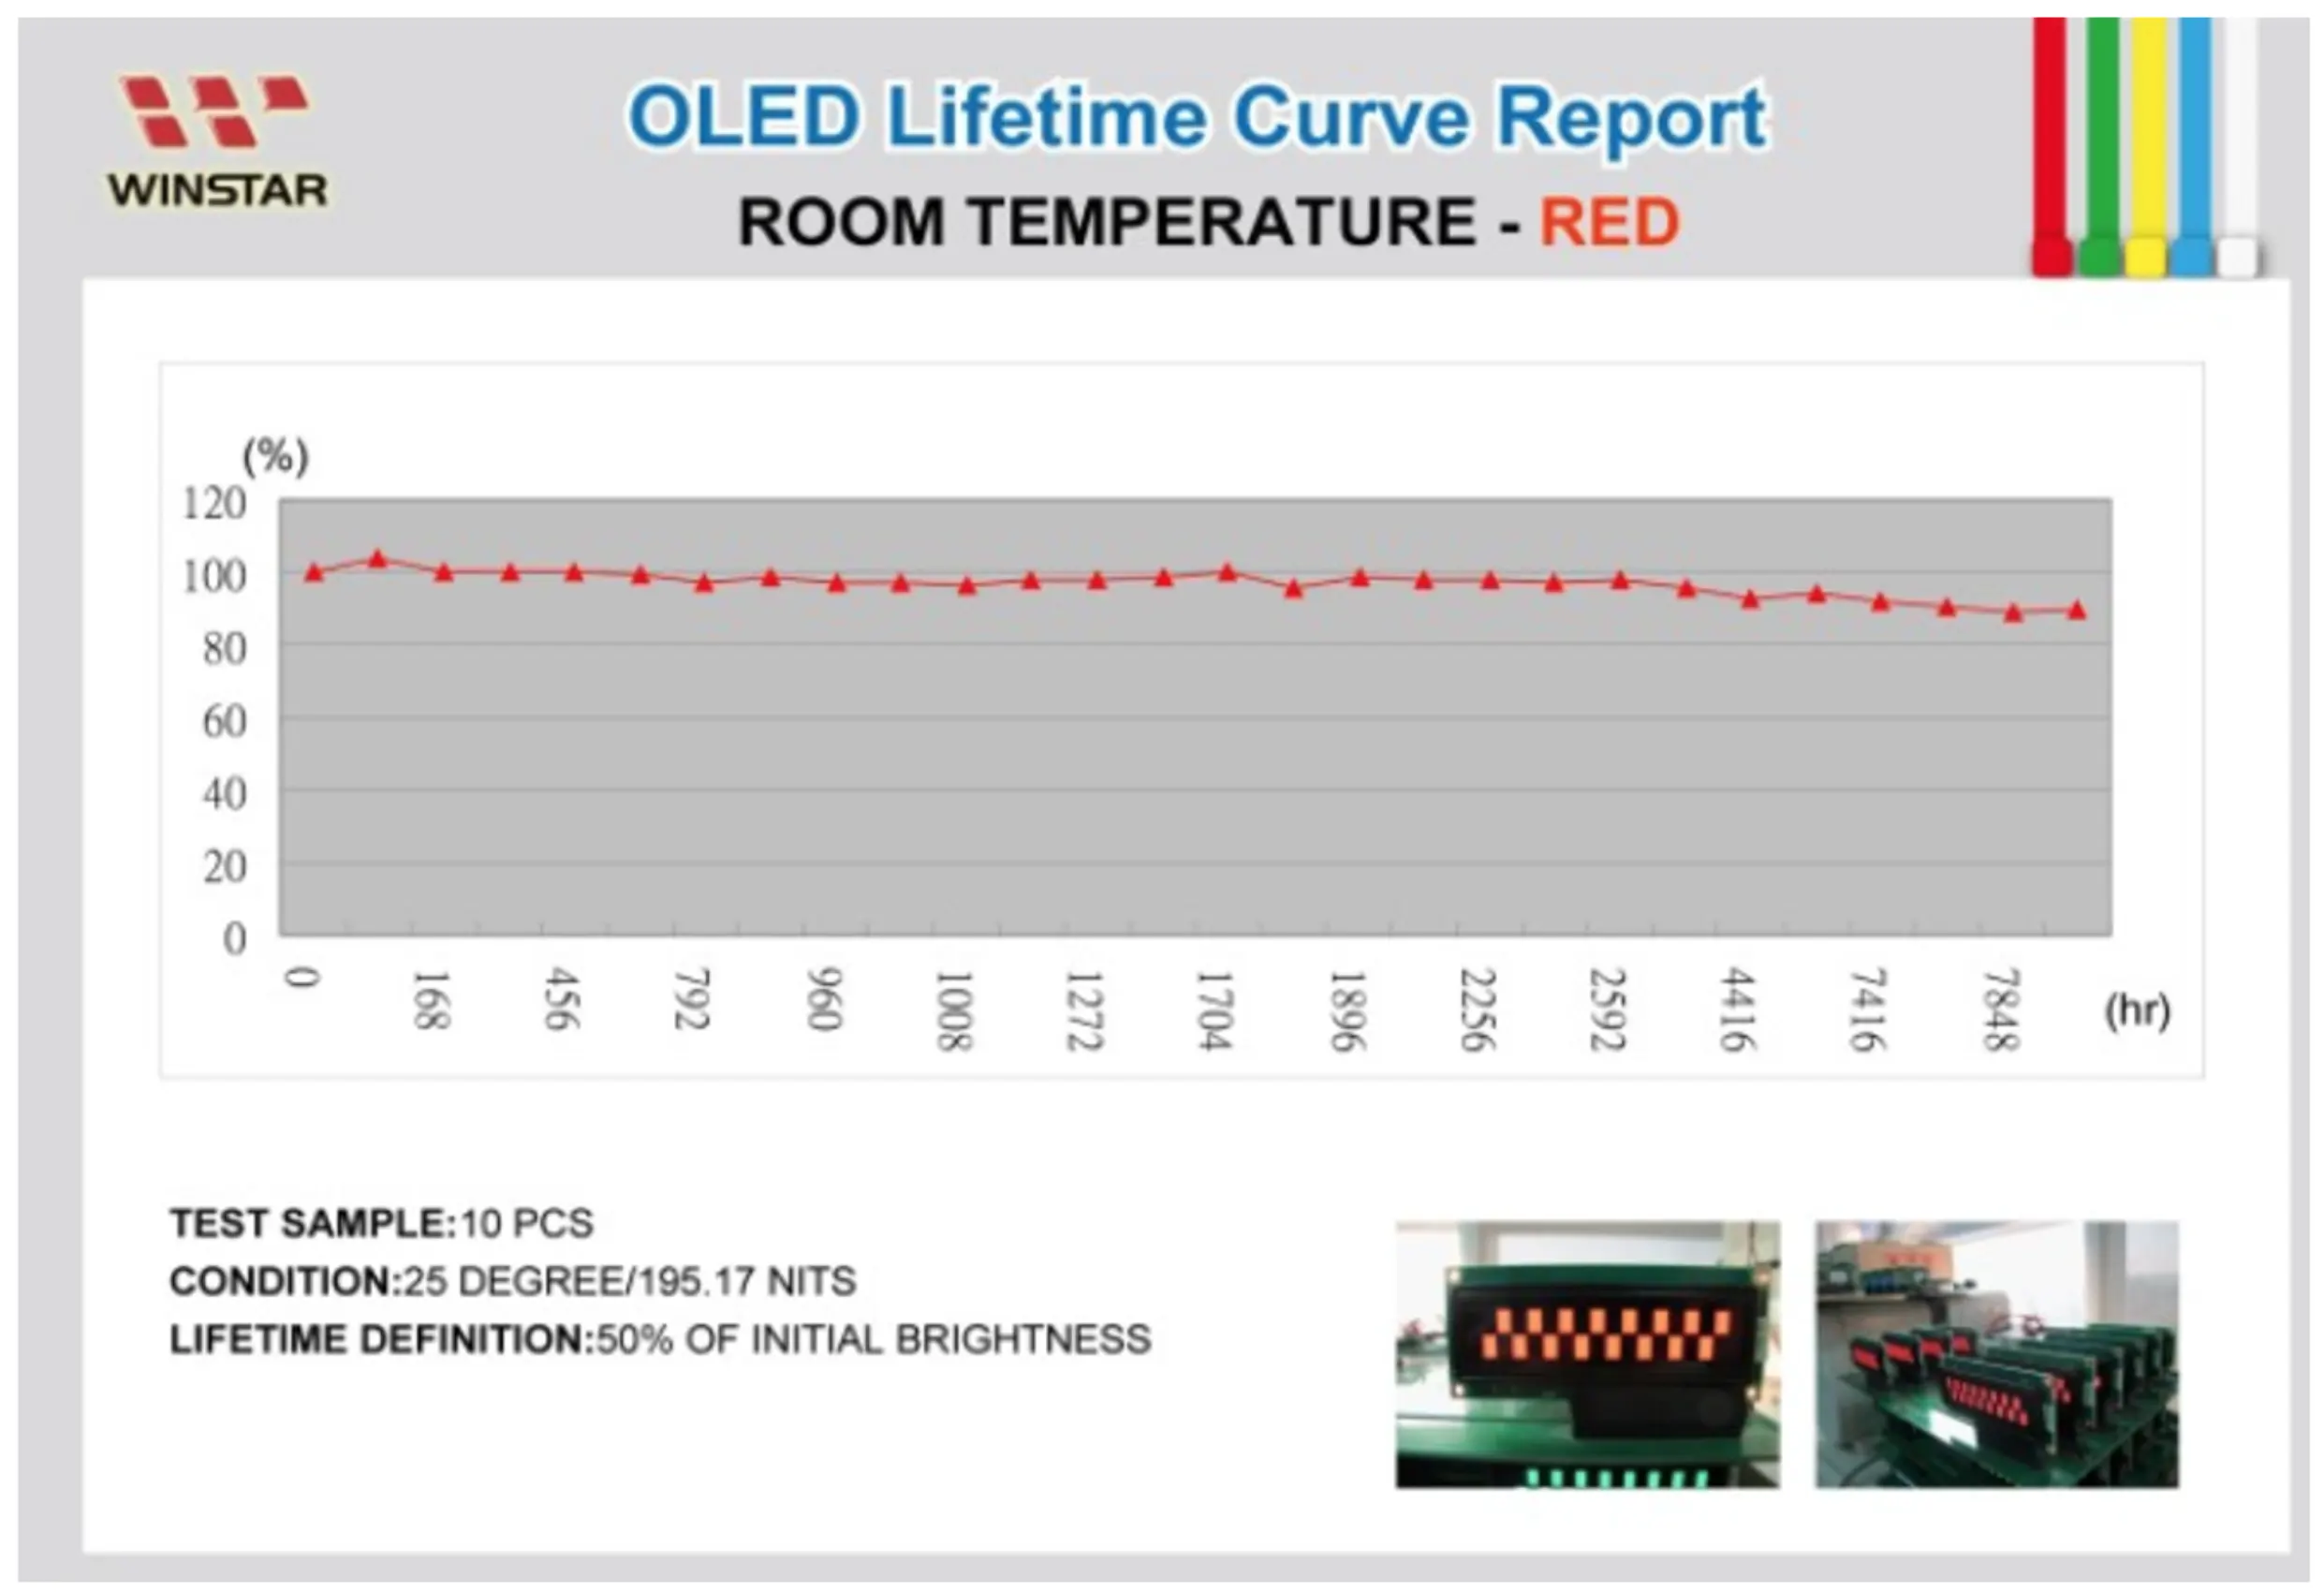 What is the lifetime of OLED displays